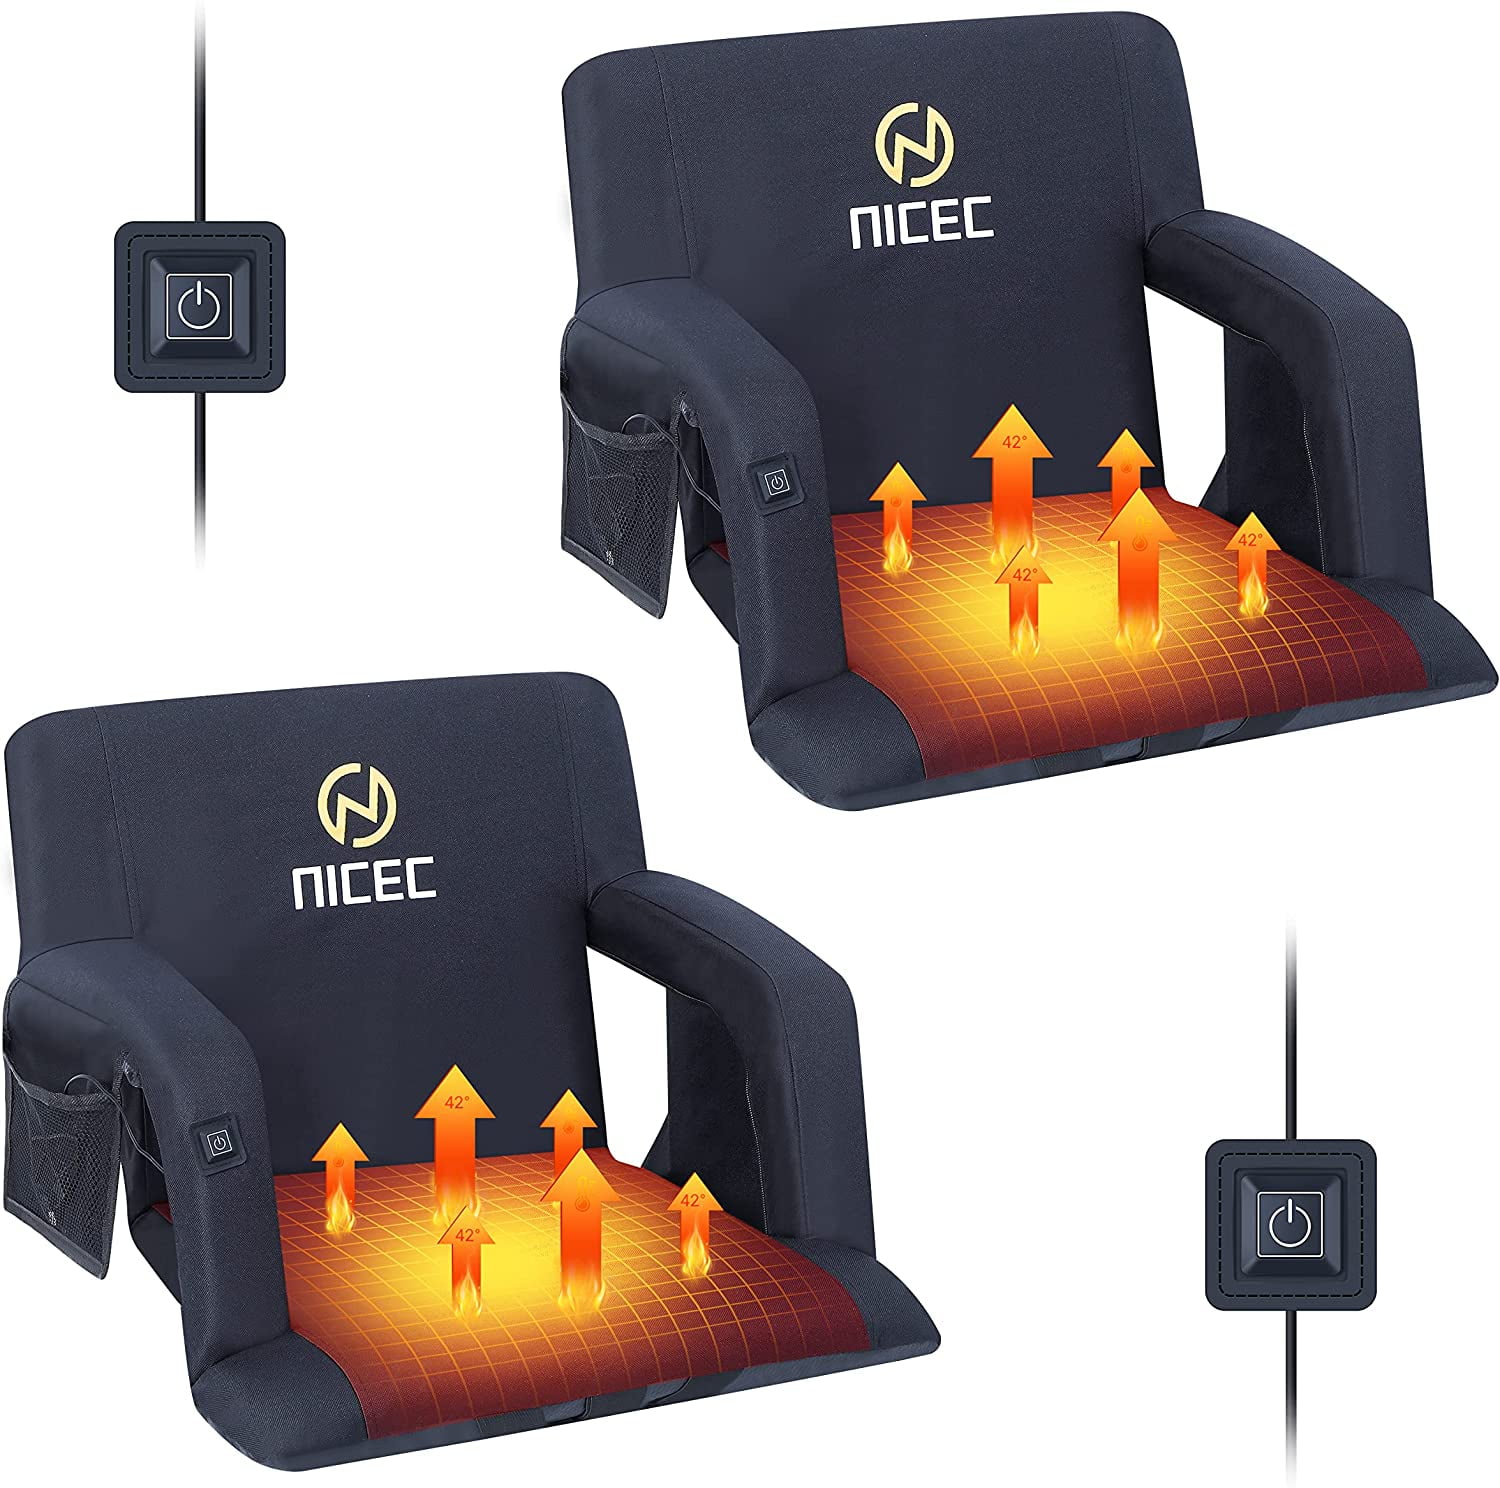 5 Best Heated Seat Cushions for Bleachers and Stadiums